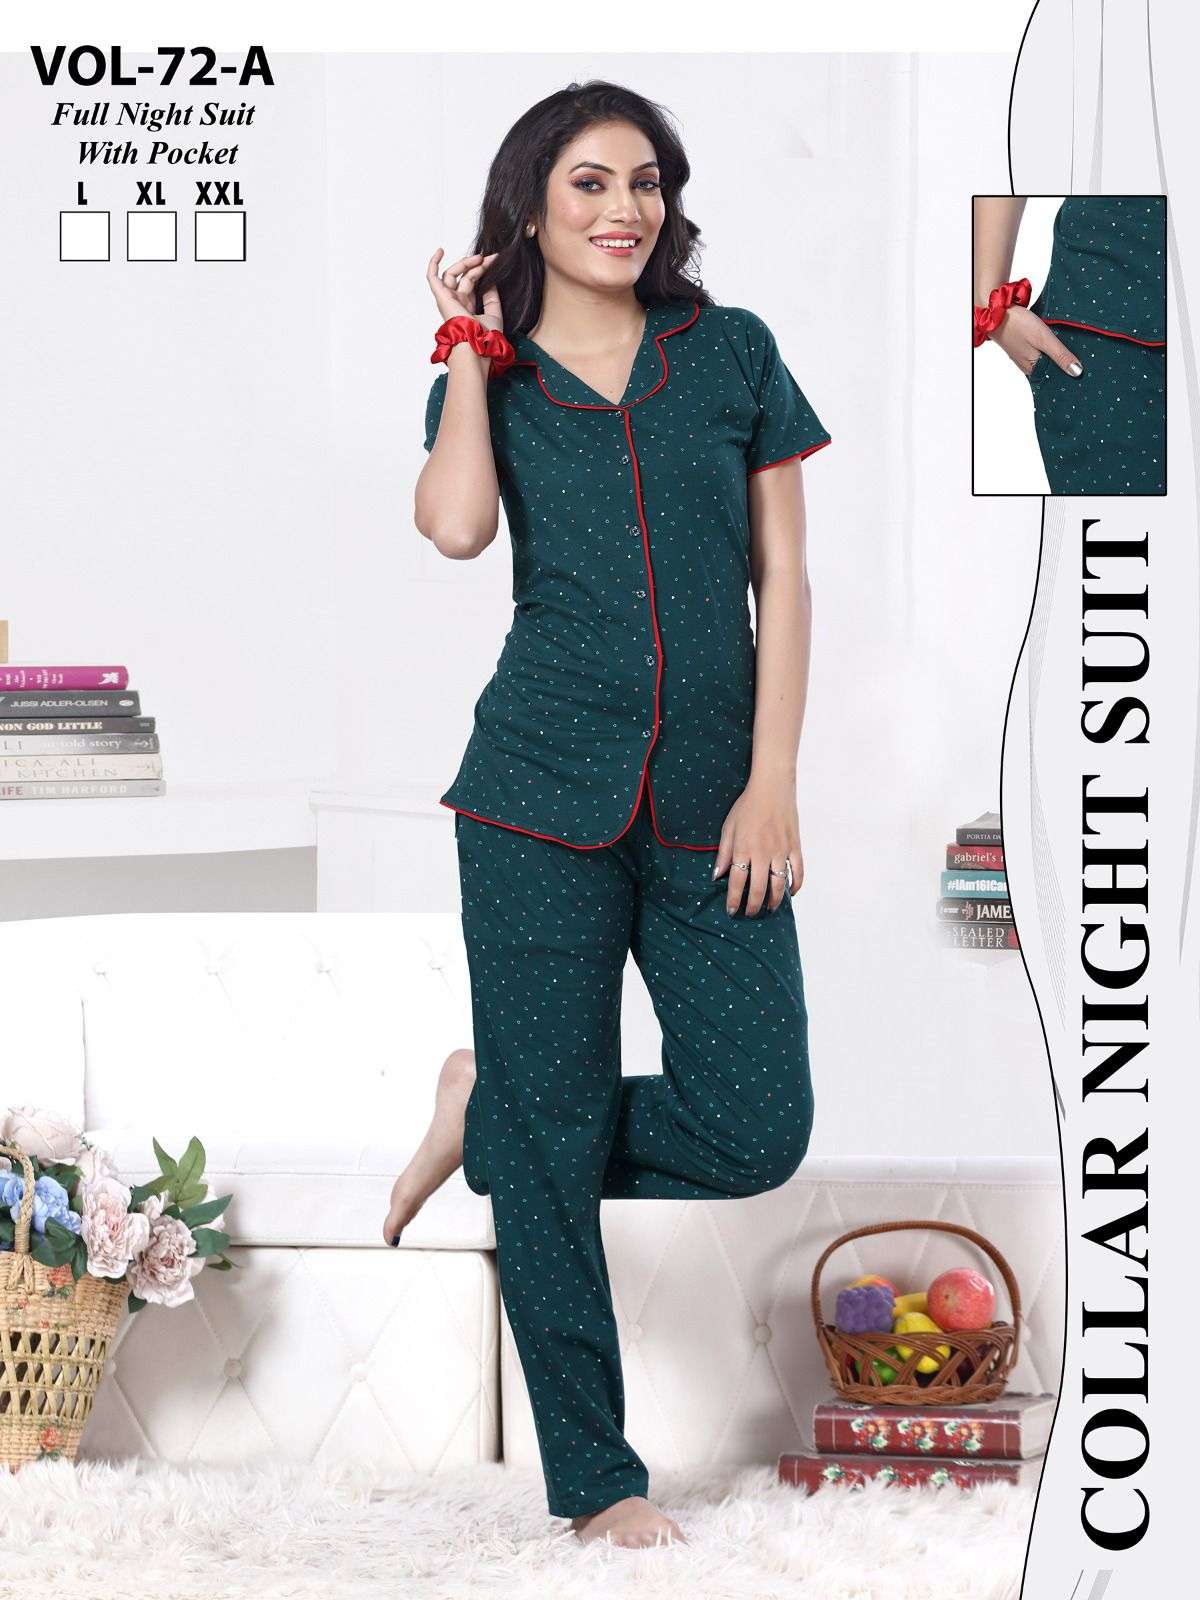 SUMMER SPECIAL C.NS VOL.72 A Heavy Shinker Hosiery Cotton NIGHT SUIT CATALOG WHOLESALER BEST RATE